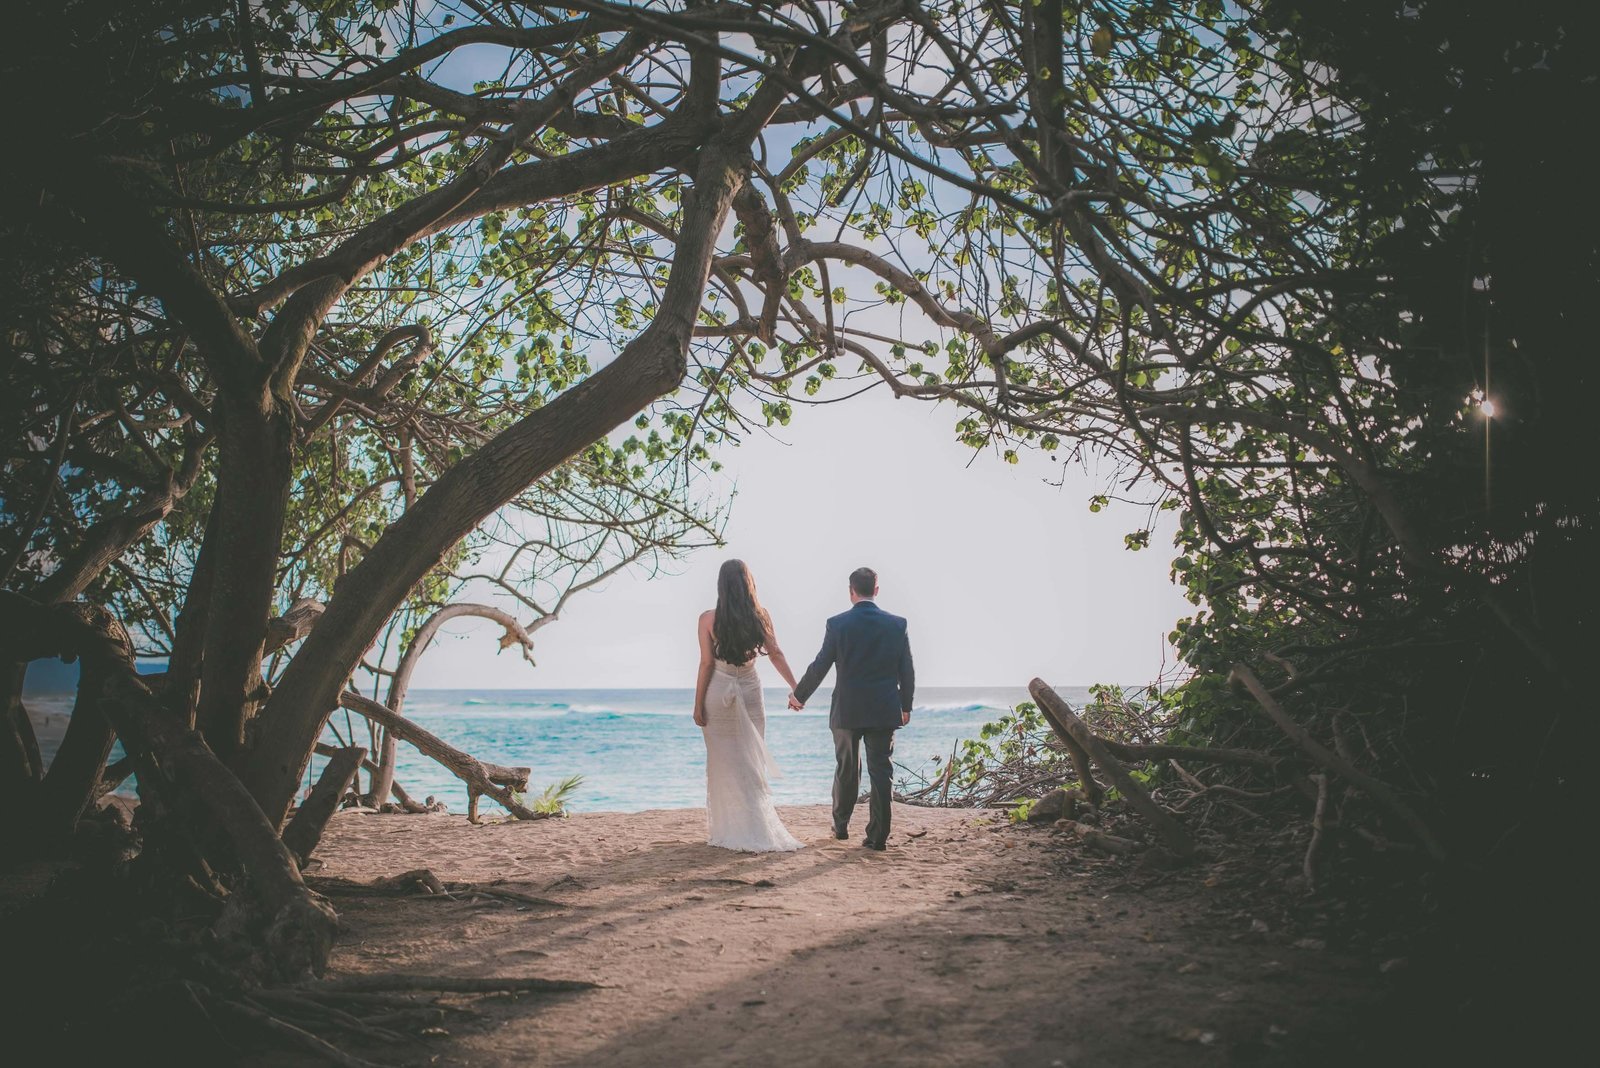 Bride and groom hold hands and take in the Oahu beach view while in the tree line.